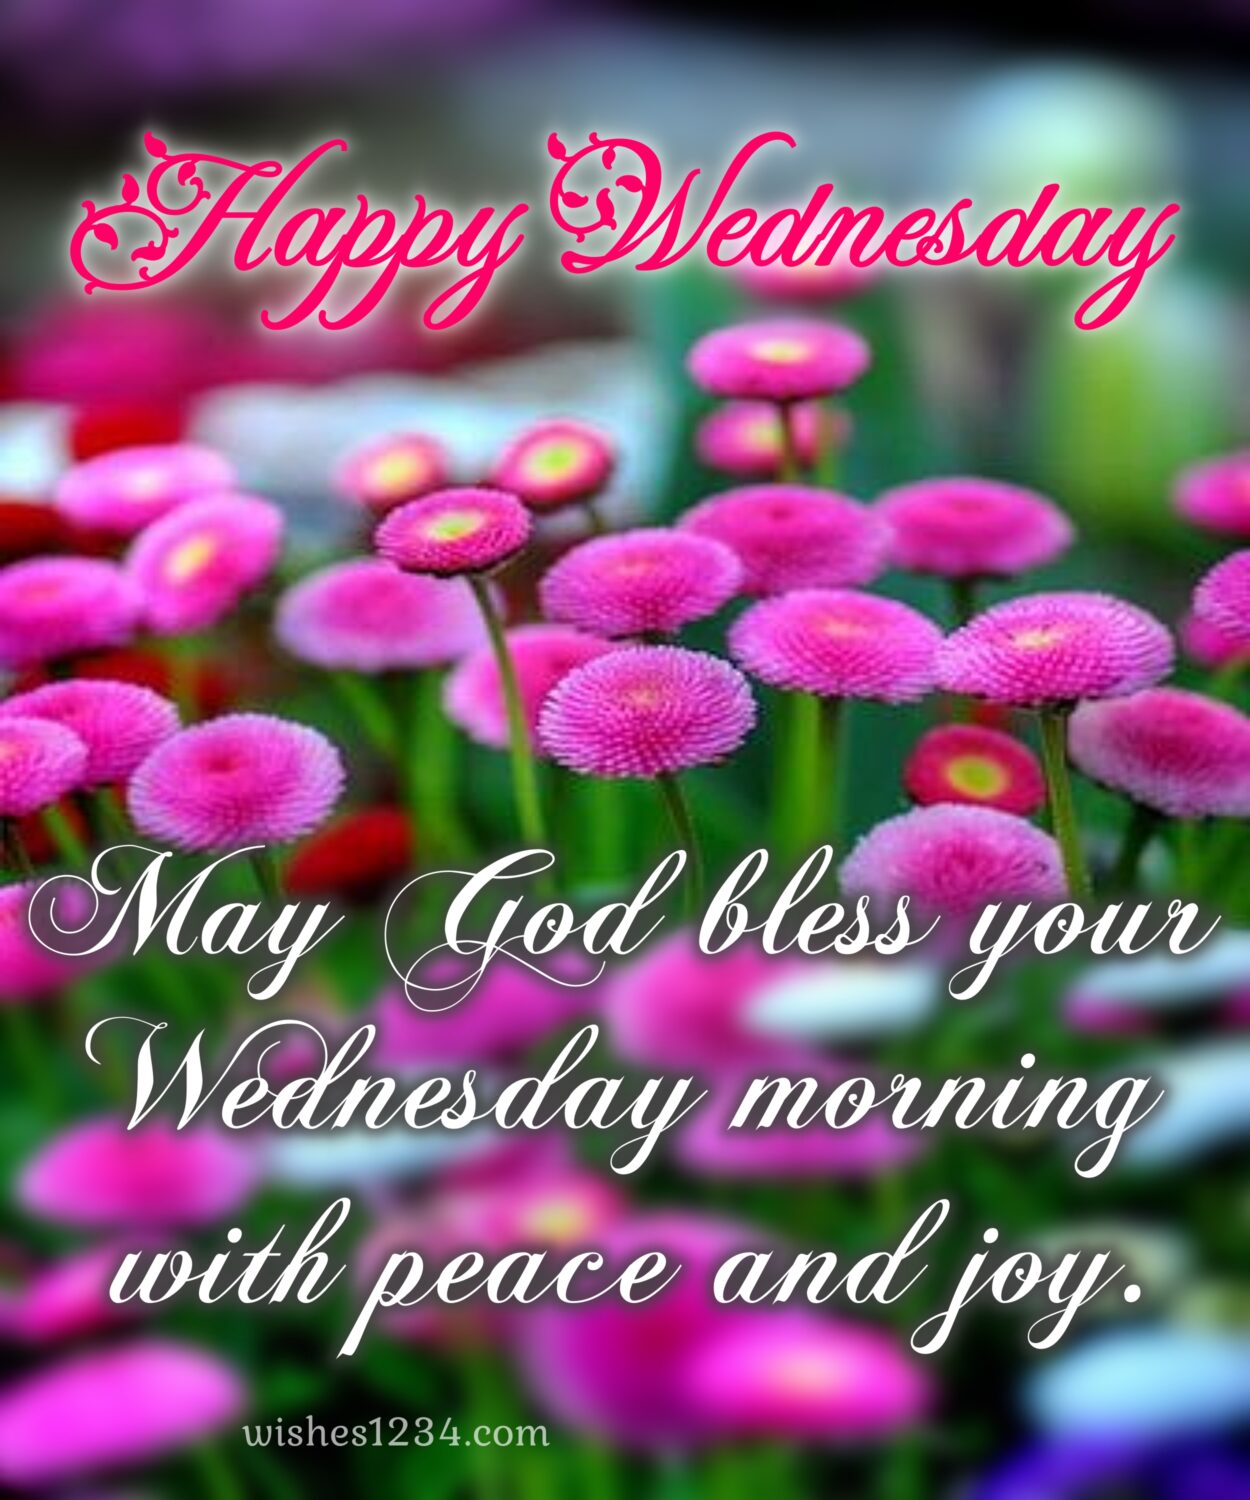 Wednesday quote with chrysanthemum flower, Blessings Wednesday.